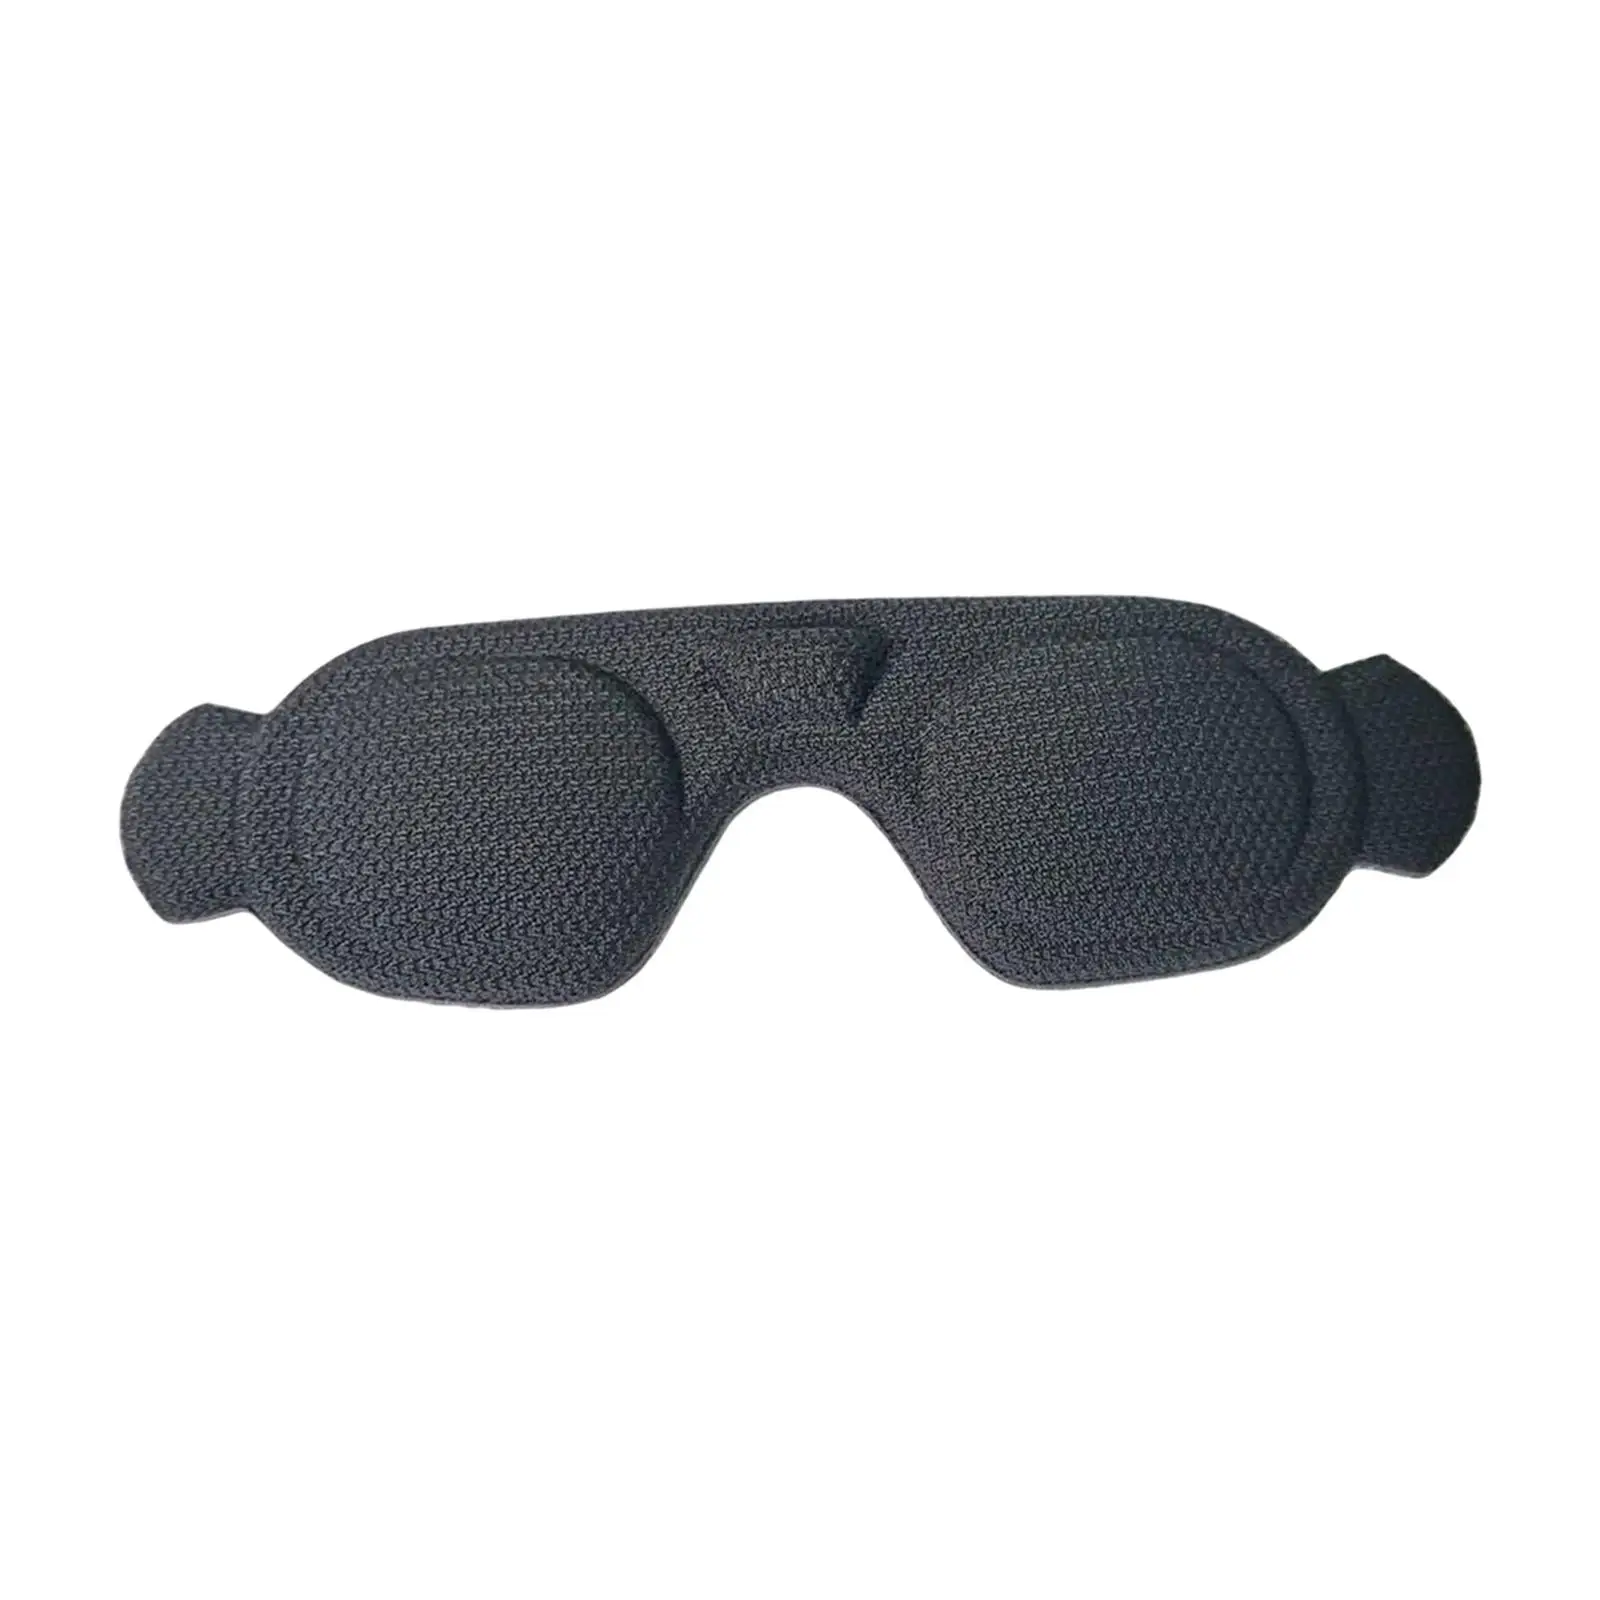 

Lens Protector Lightproof Prevent Sunshine Light Sun Shade Lens Protection Cover Sunshade Pad for Goggles Integra Accessory